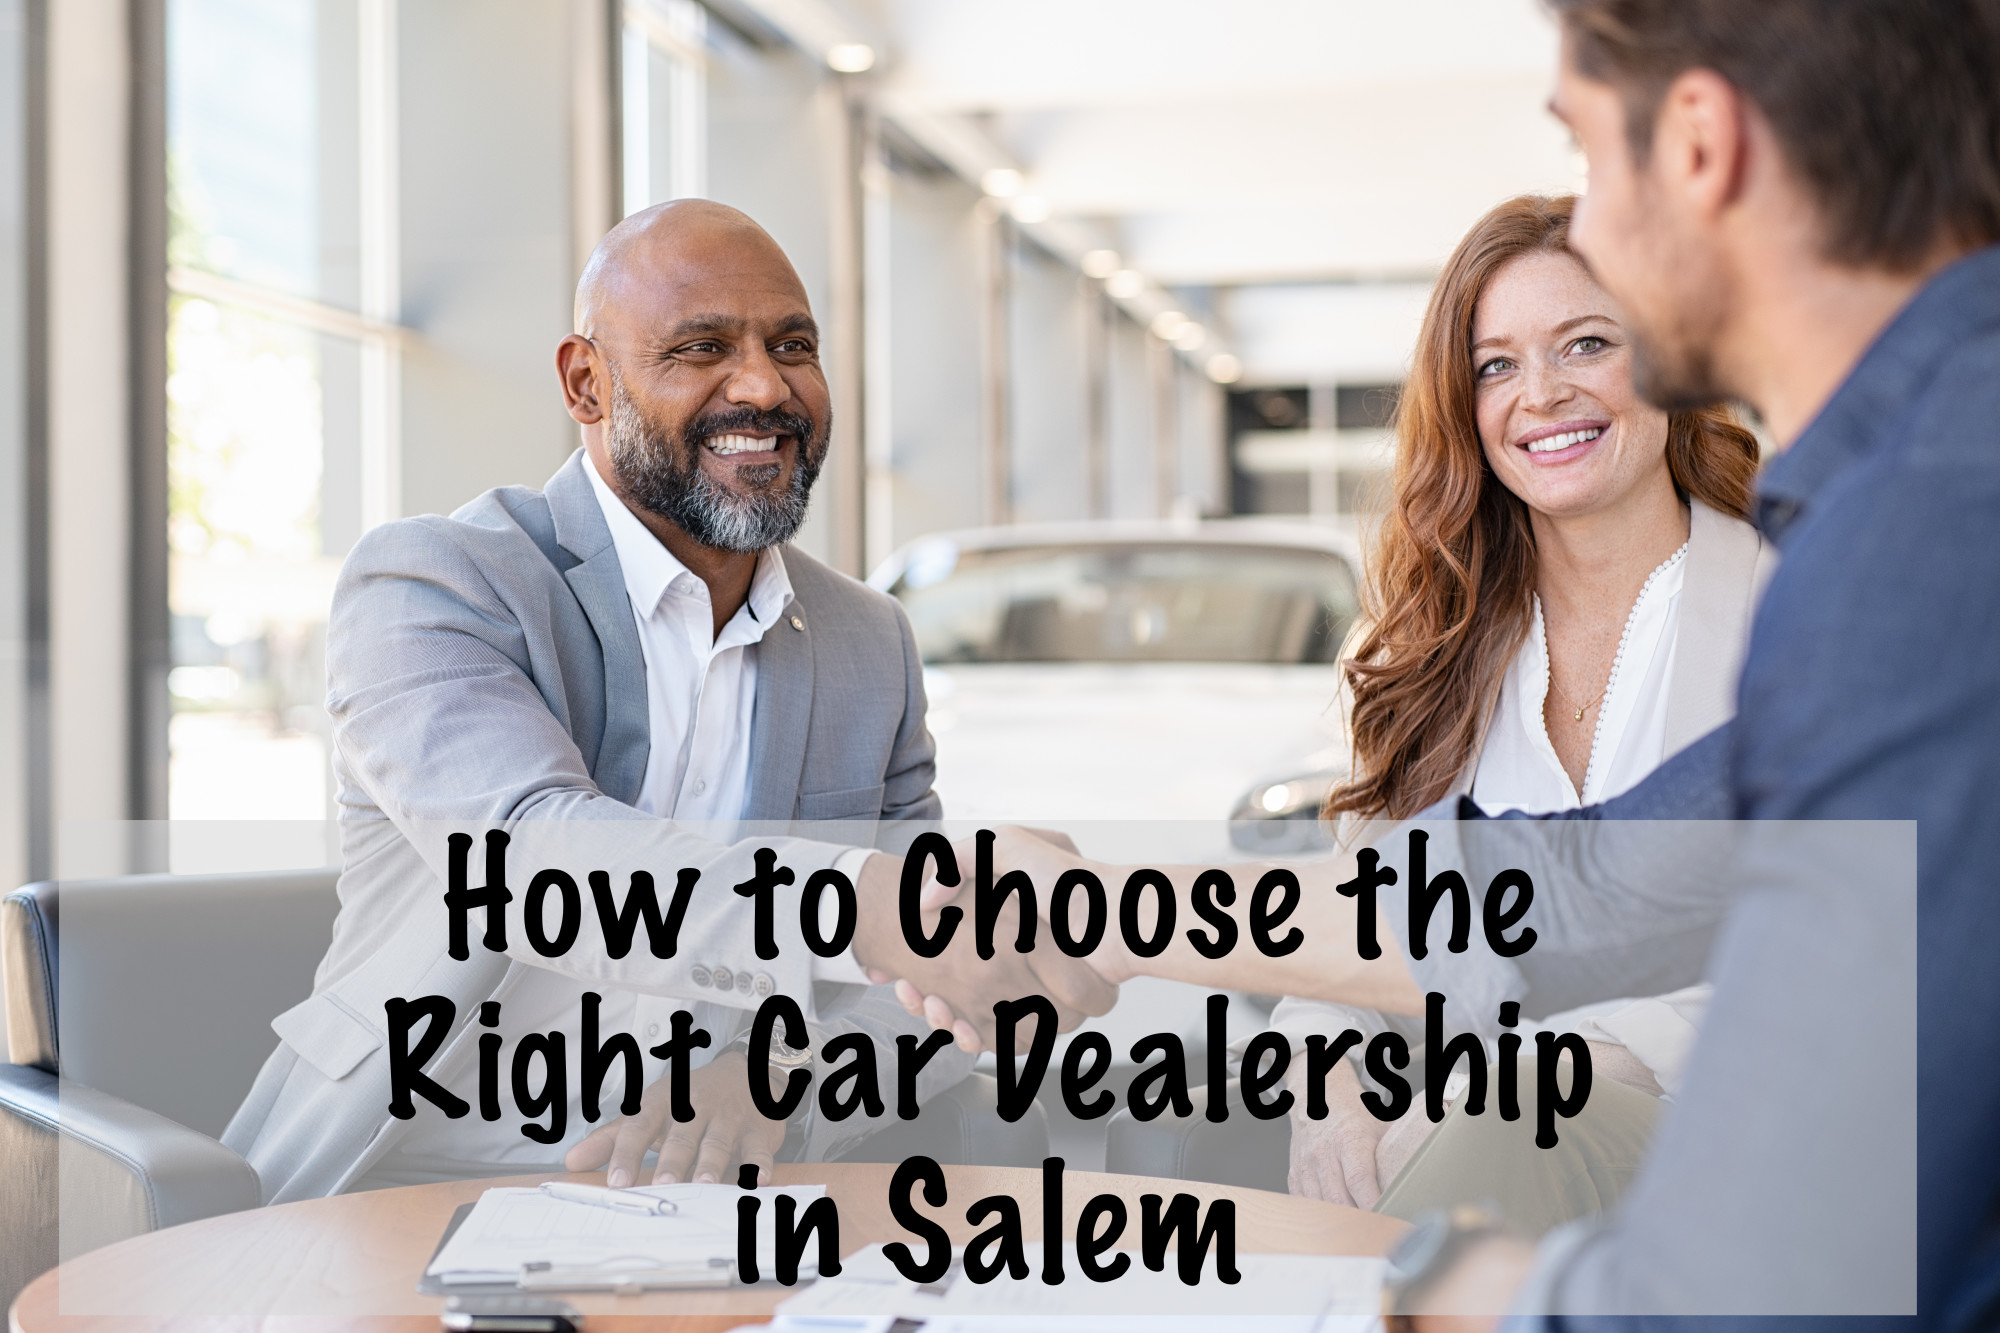 How to choose the right car dealership